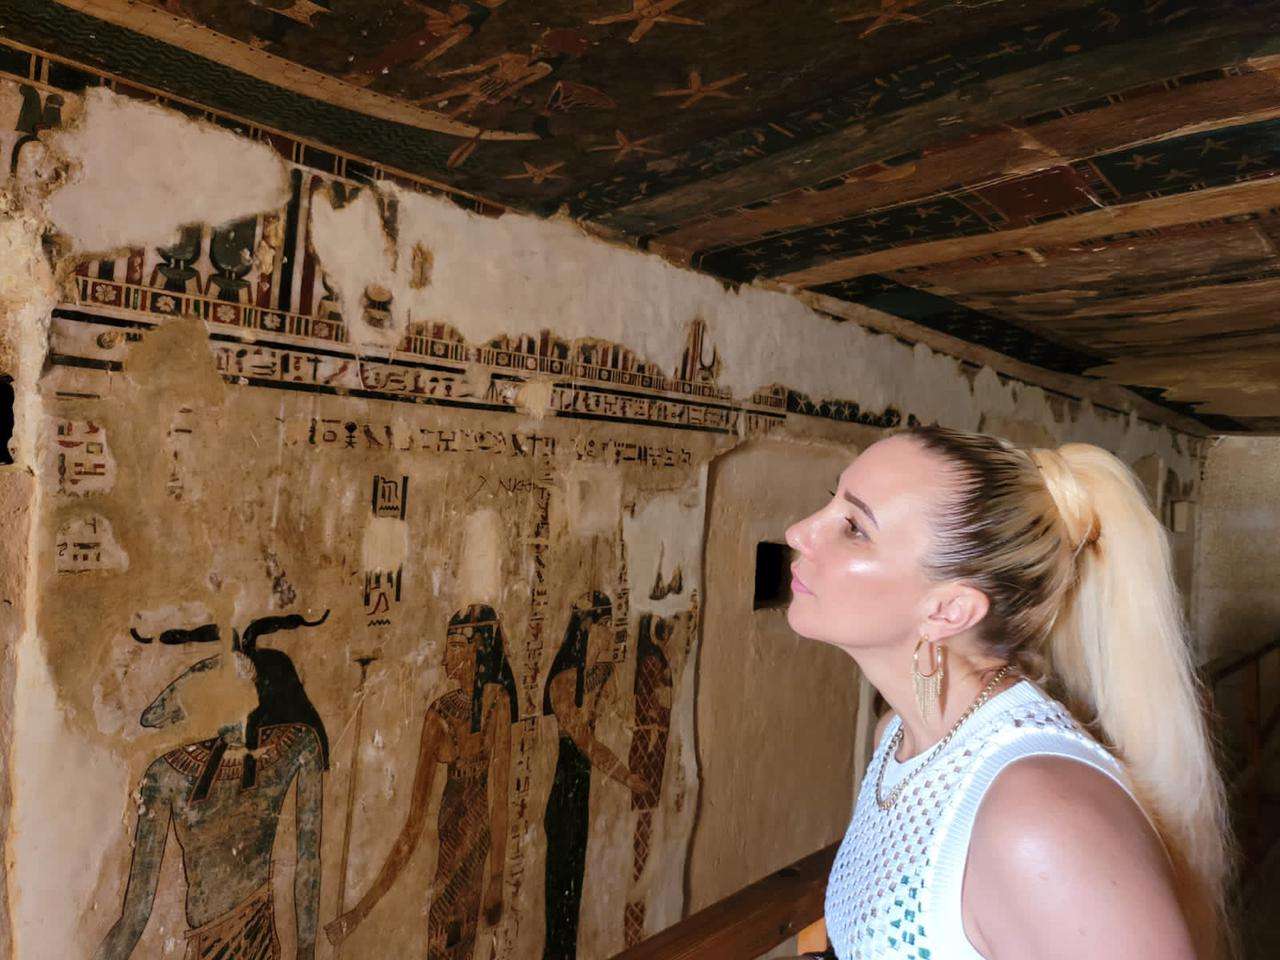 American Singer Shoots Music Video Inside Temple of Amun-Re (Photos)